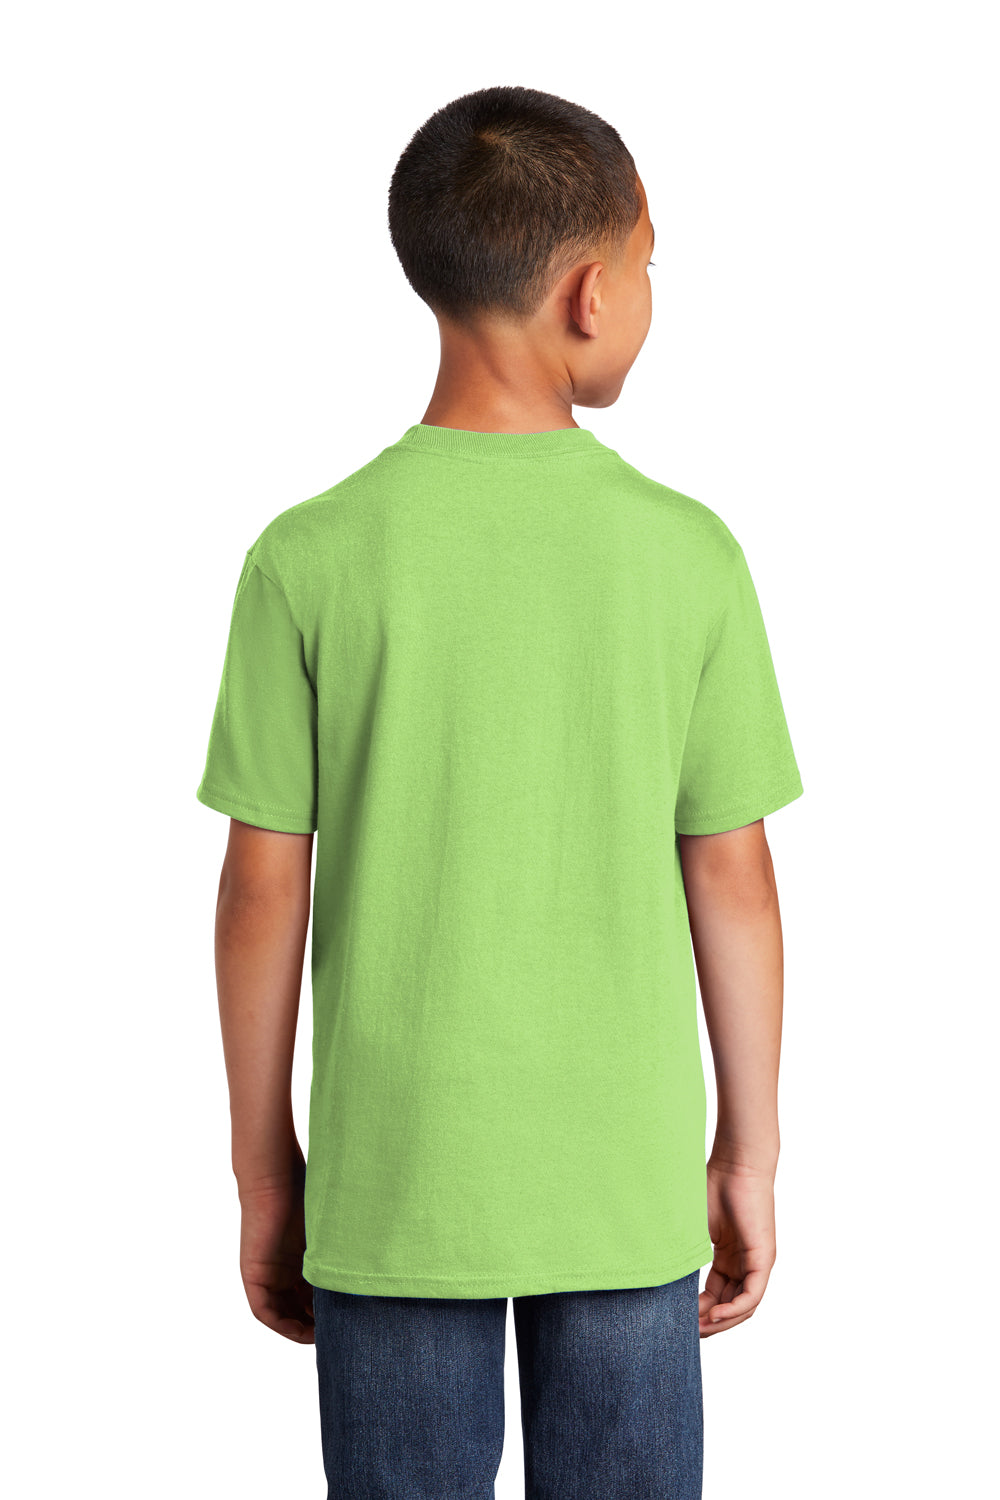 Port & Company PC54Y Youth Core Short Sleeve Crewneck T-Shirt Lime Green Back